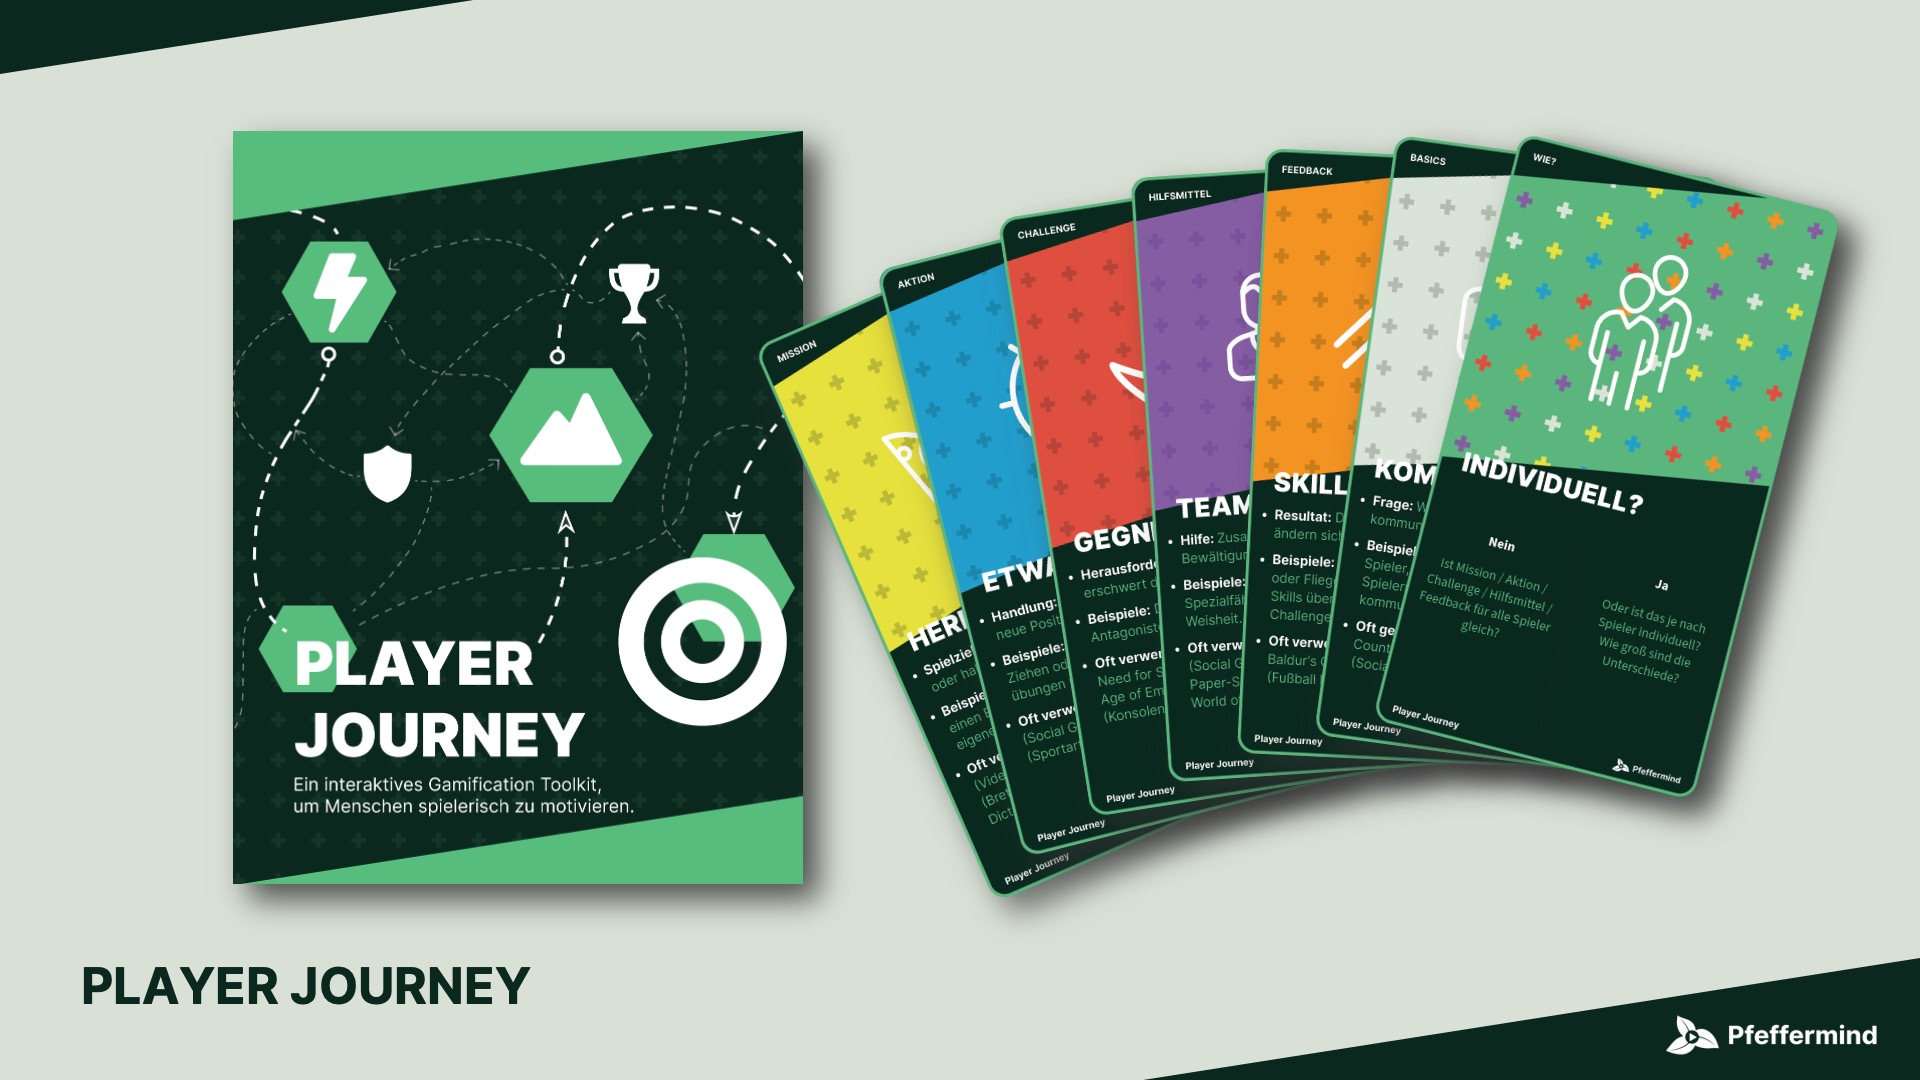 Gamification-Toolkit: Die Player Journey